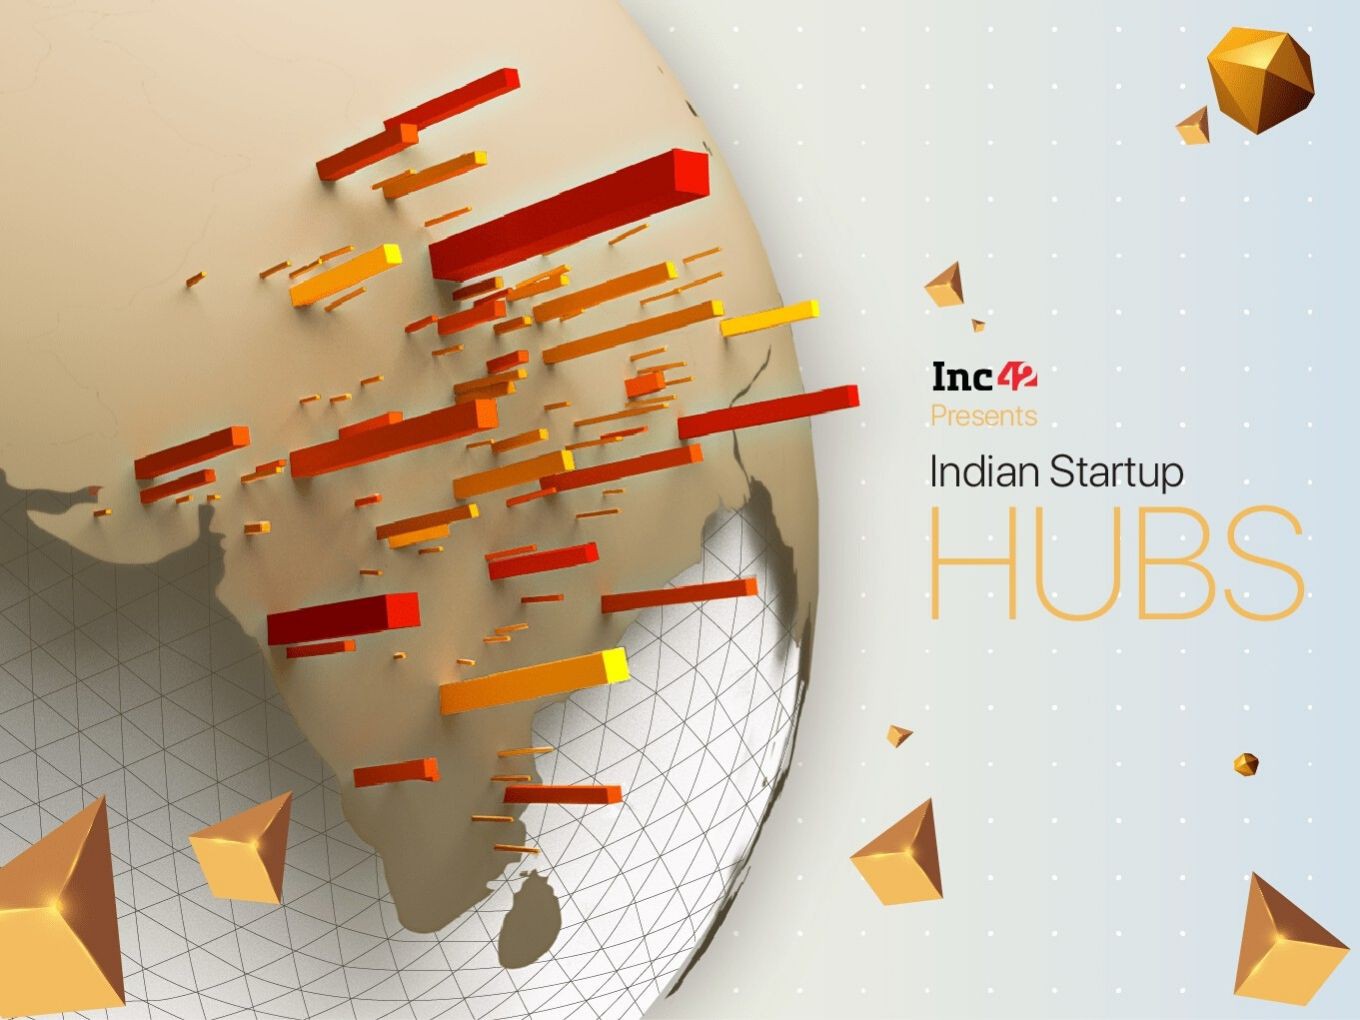 Introducing Indian Startup Hubs: Spotlight Turns To India’s Emerging Startup Cities And Innovation